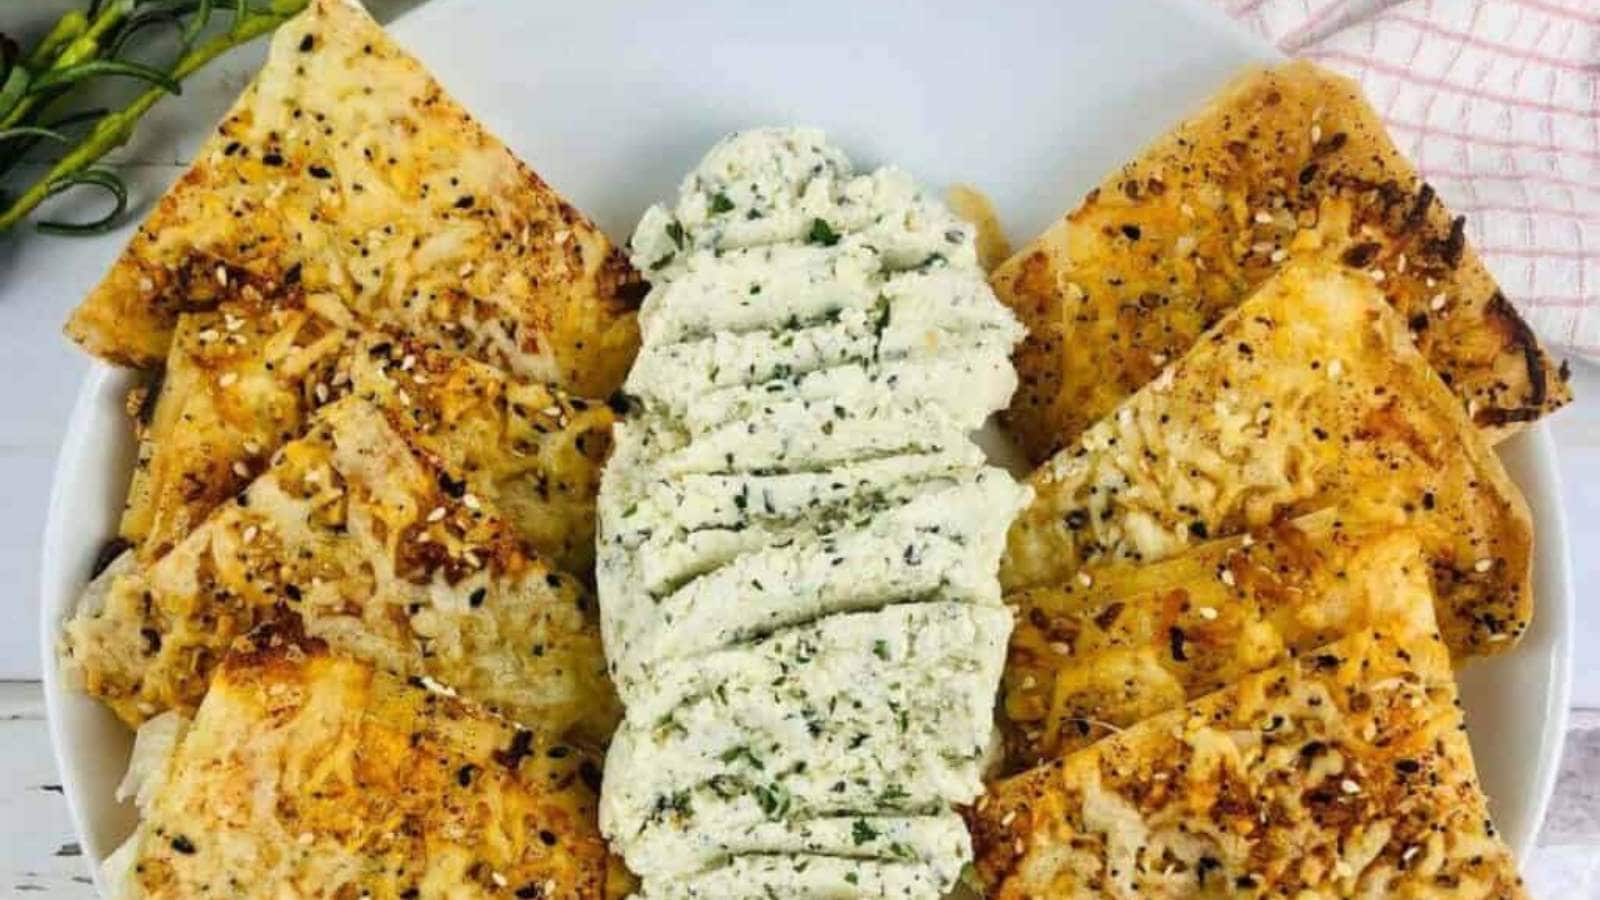 Parmesan Ricotta Dip recipe by Home School And Happiness.